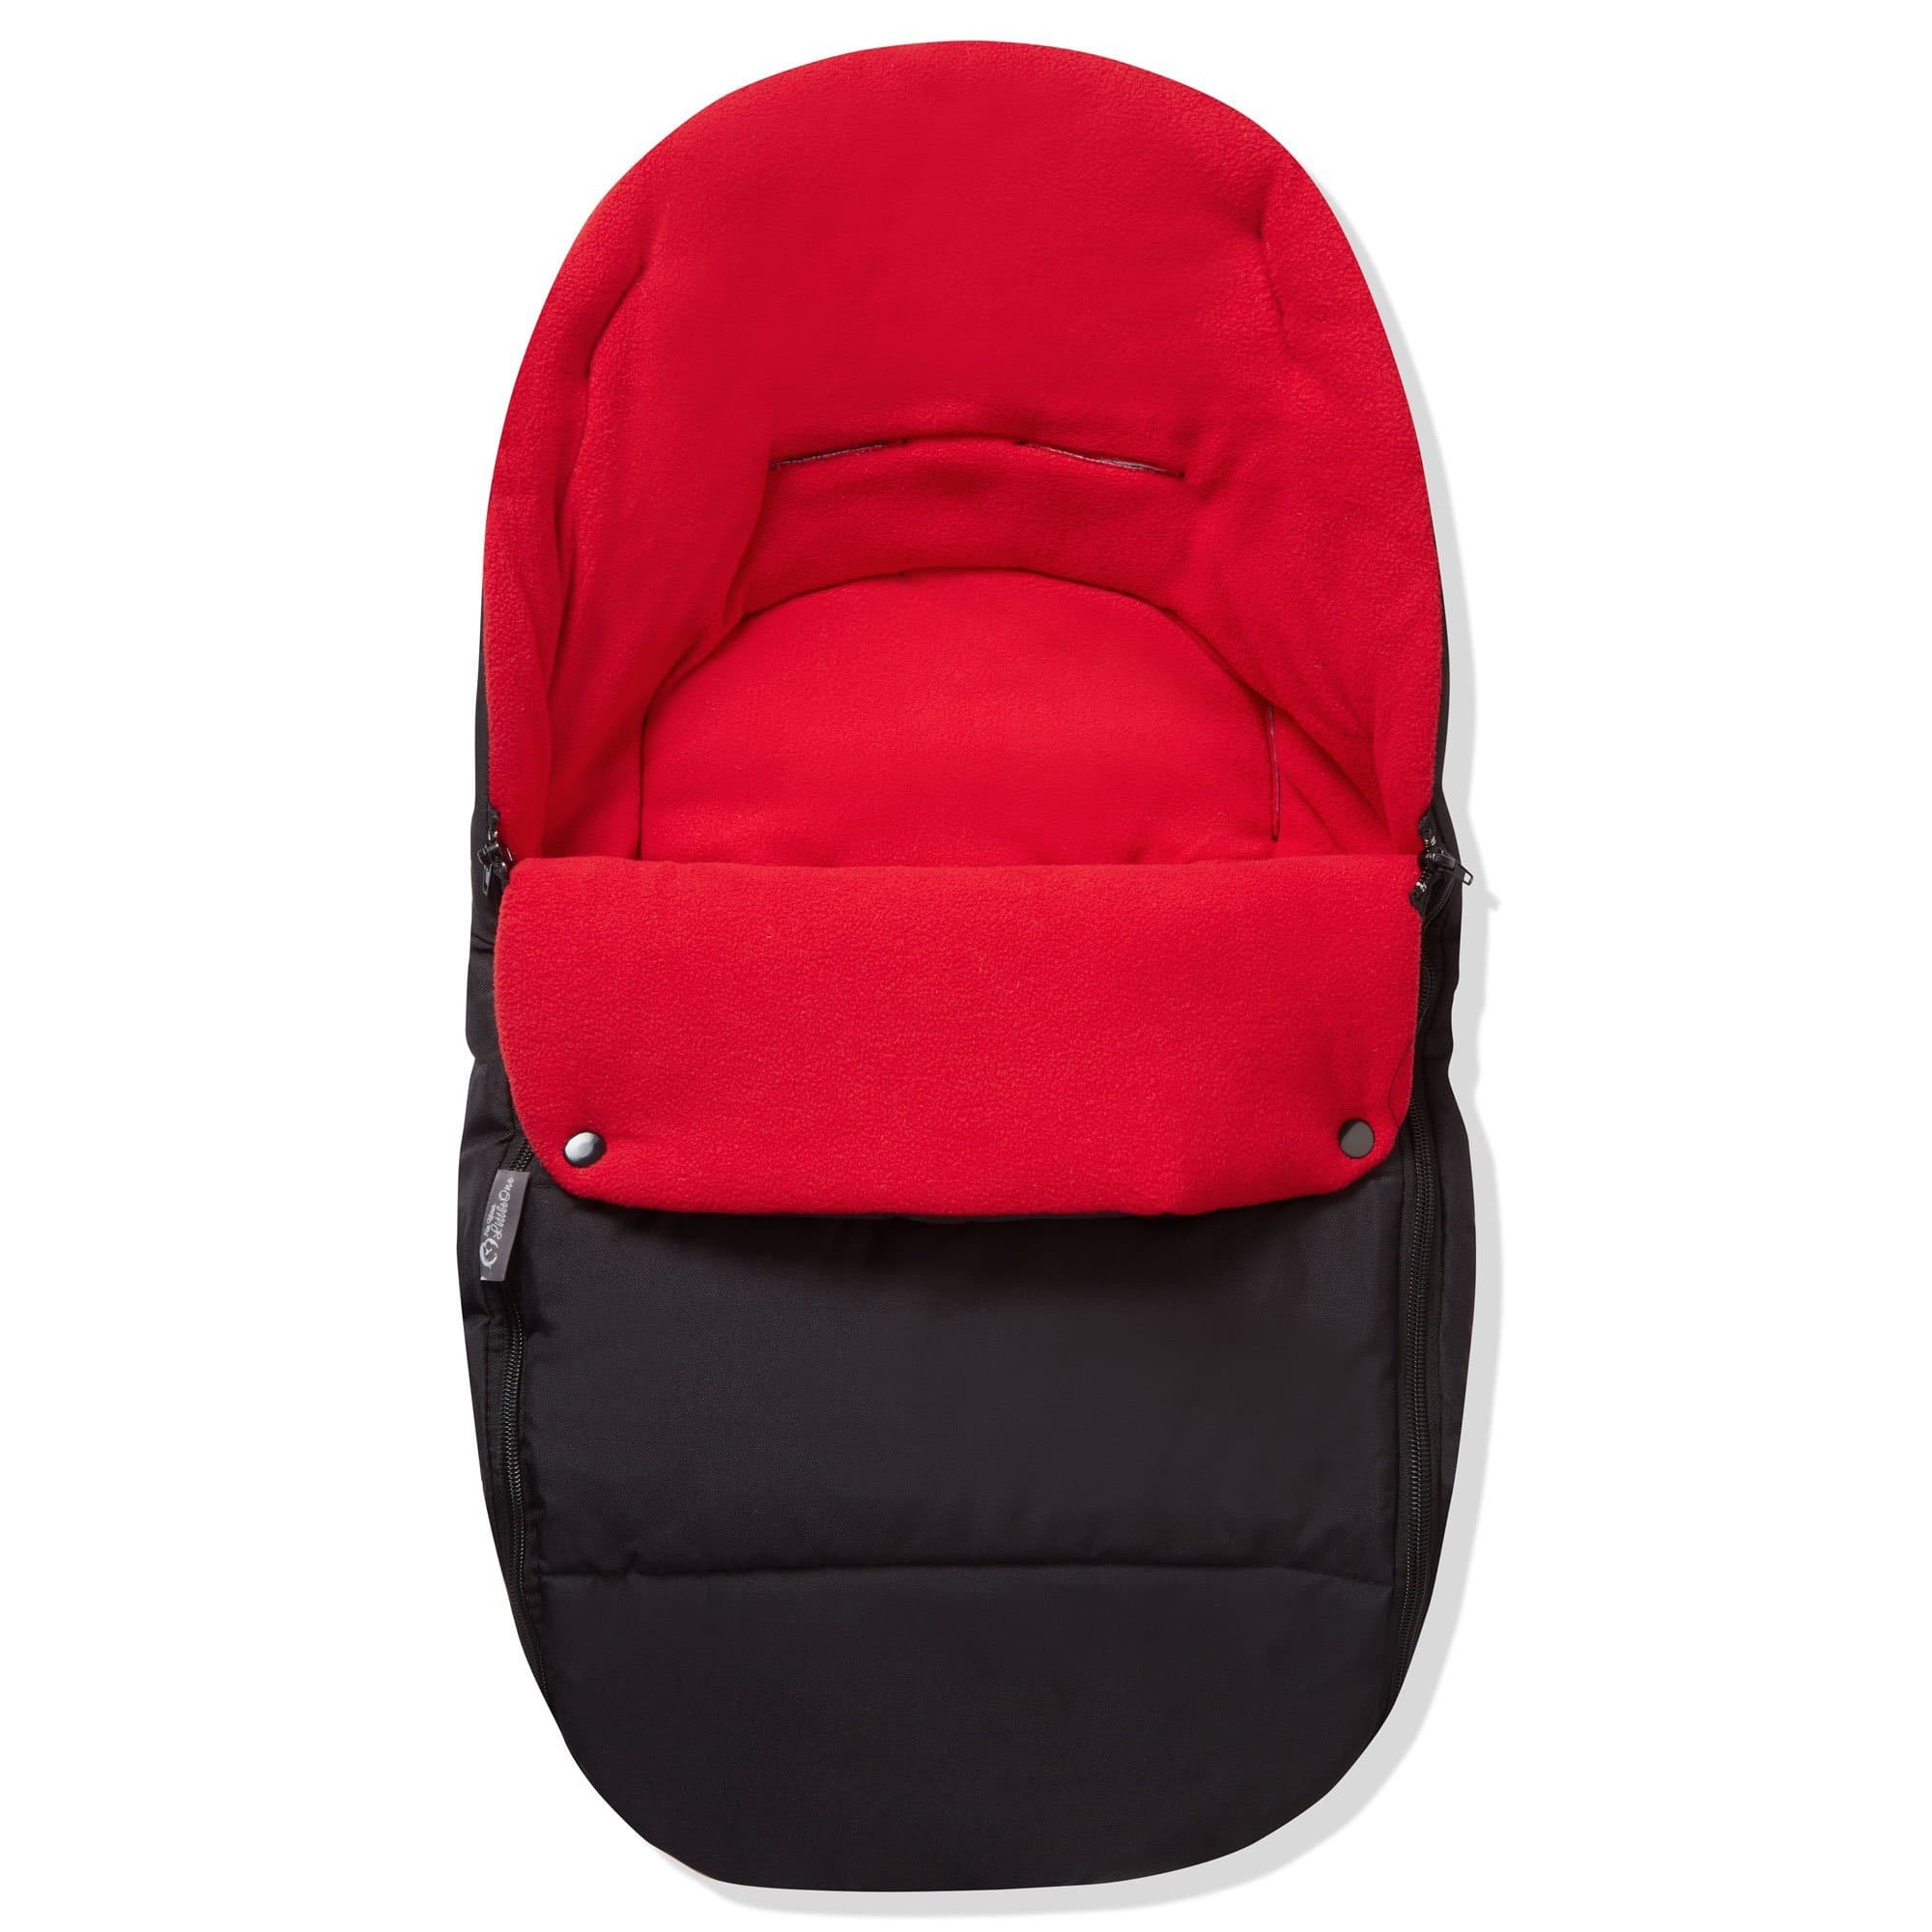 Premium Car Seat Footmuff / Cosy Toes Compatible with Cosatto - Fire Red / Fits All Models | For Your Little One